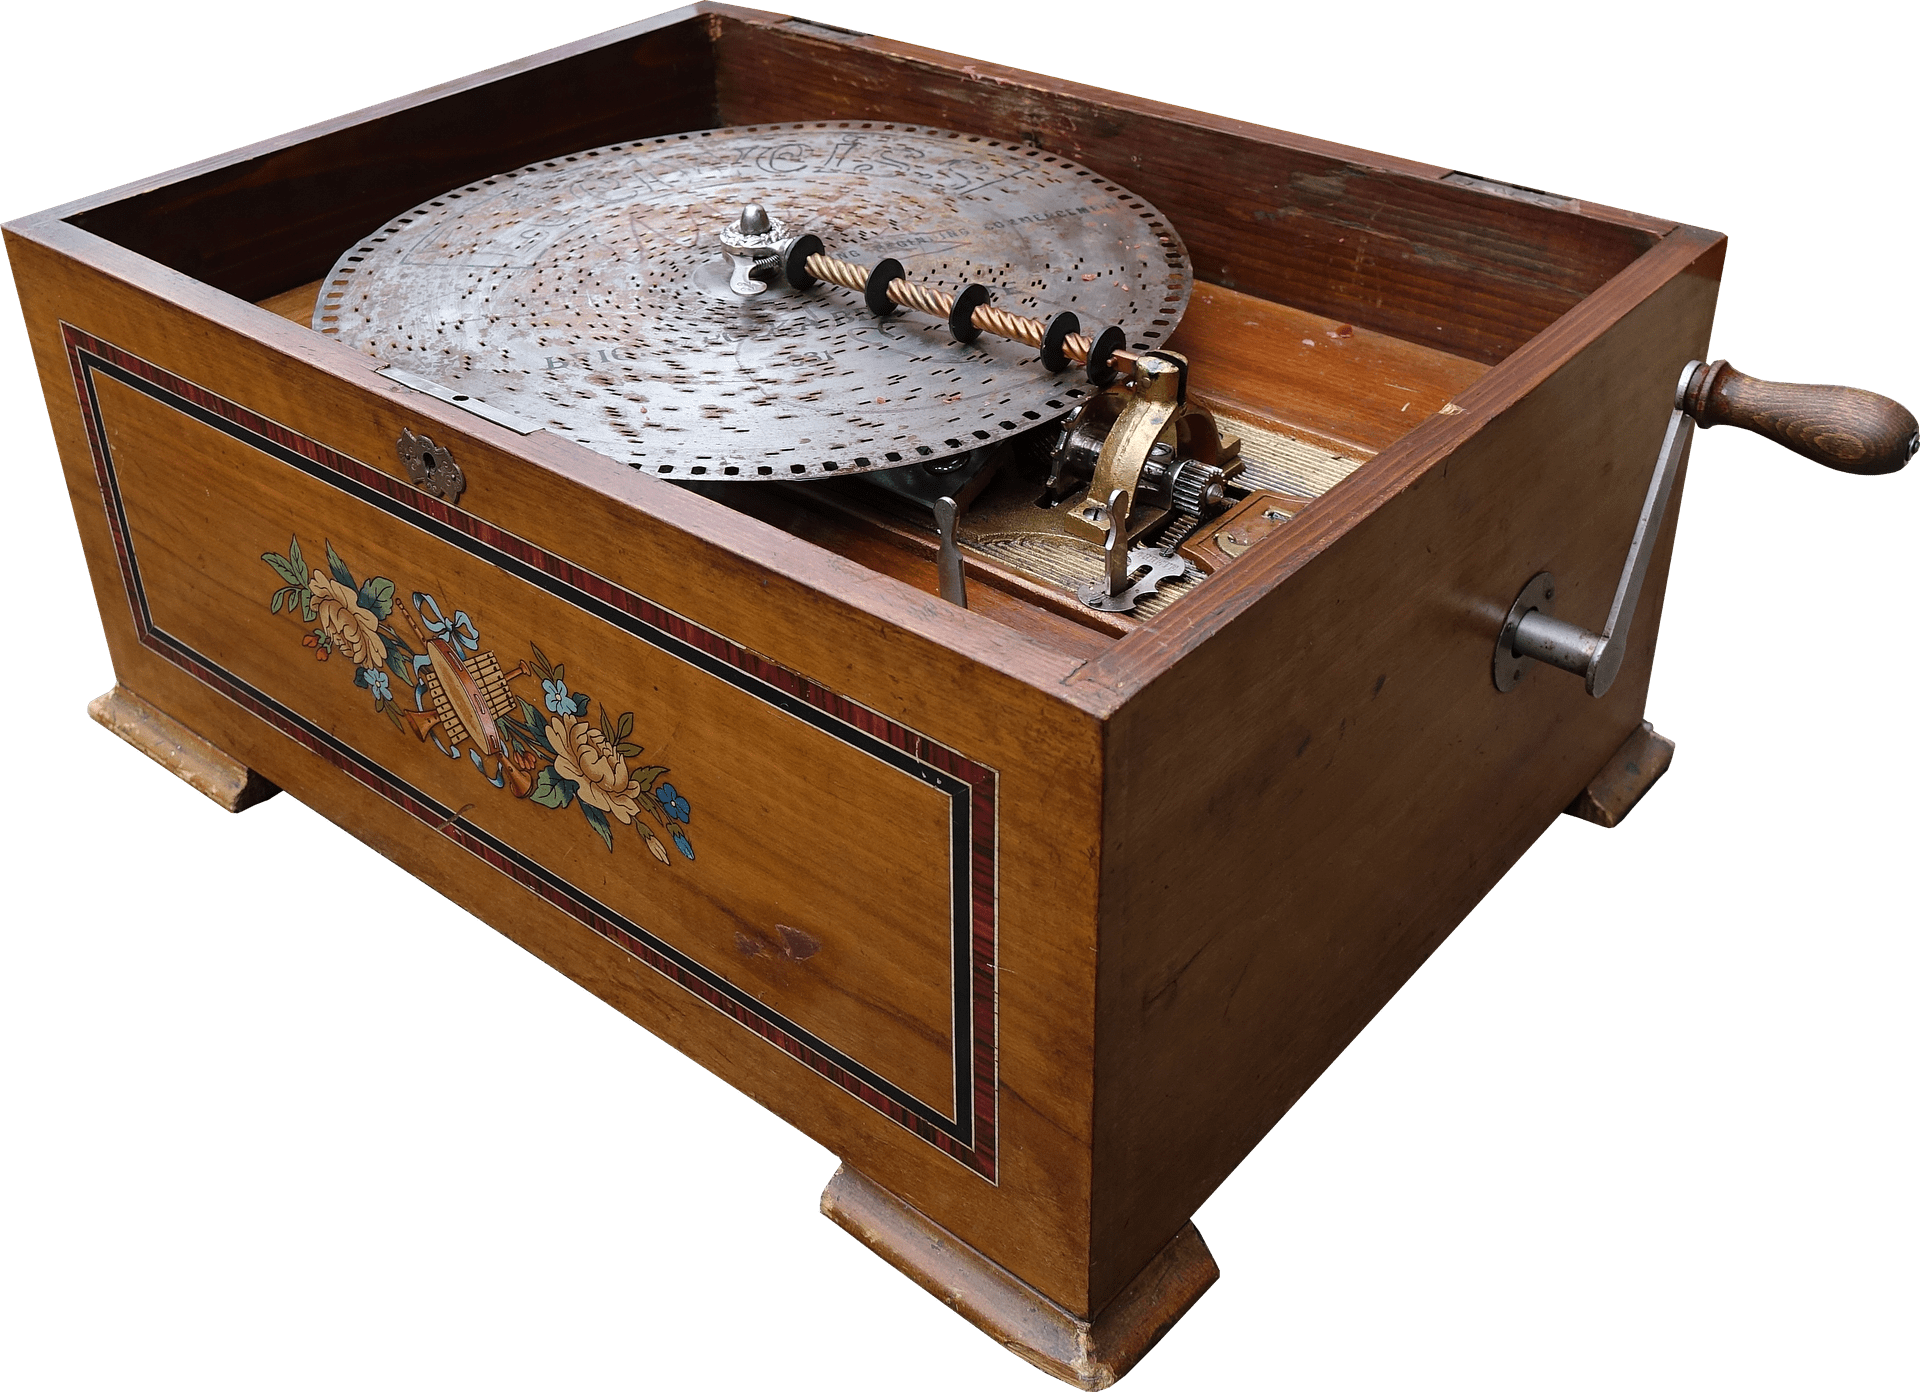 An old music box caught Albert's attention. | Source: Pixabay